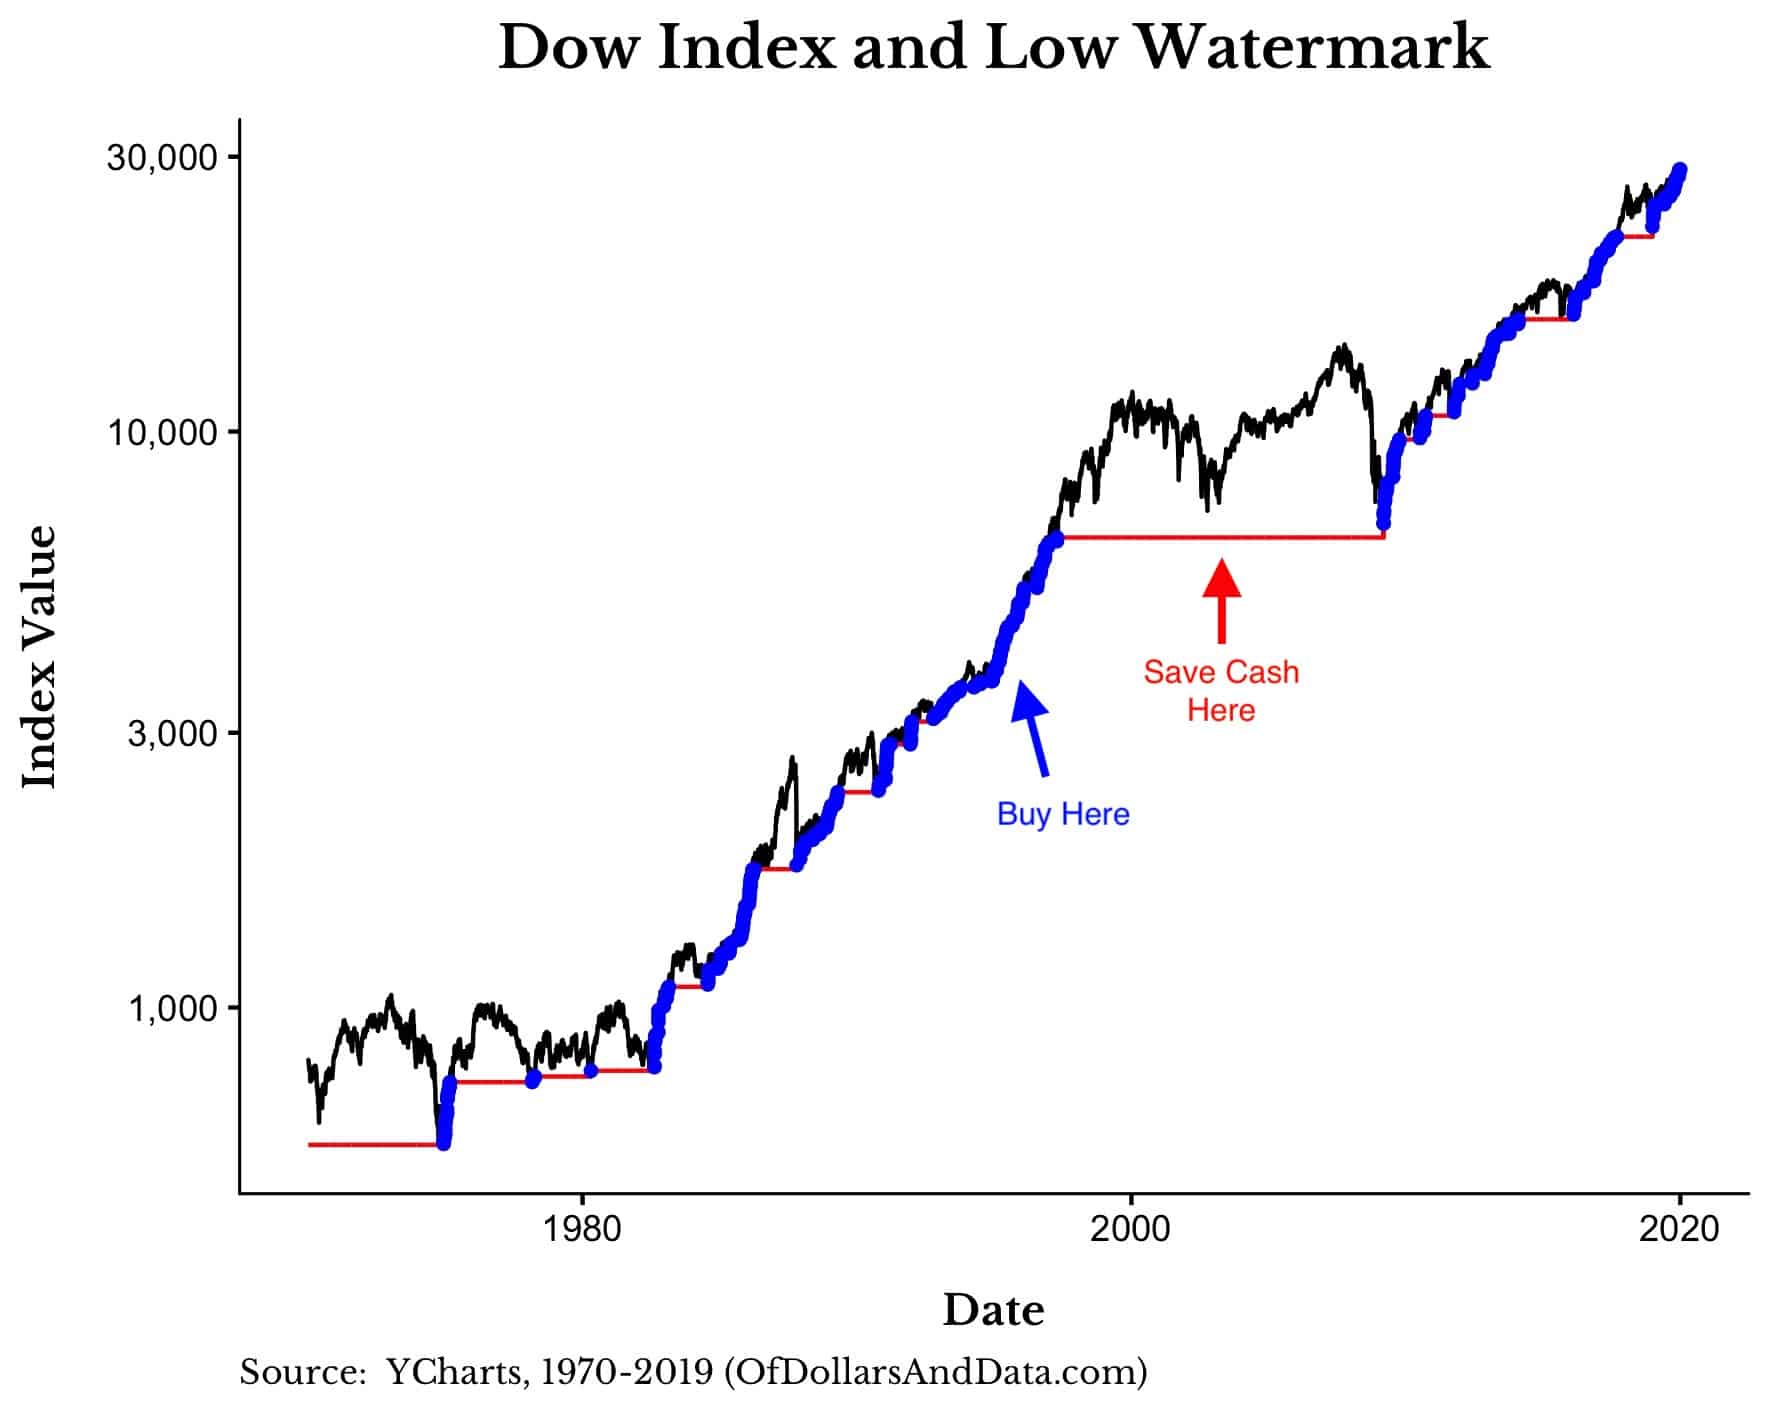 Dow Jones Industrial Average and its low watermark from 1970-2019 with the absolute bottom buying strategy highlighted.